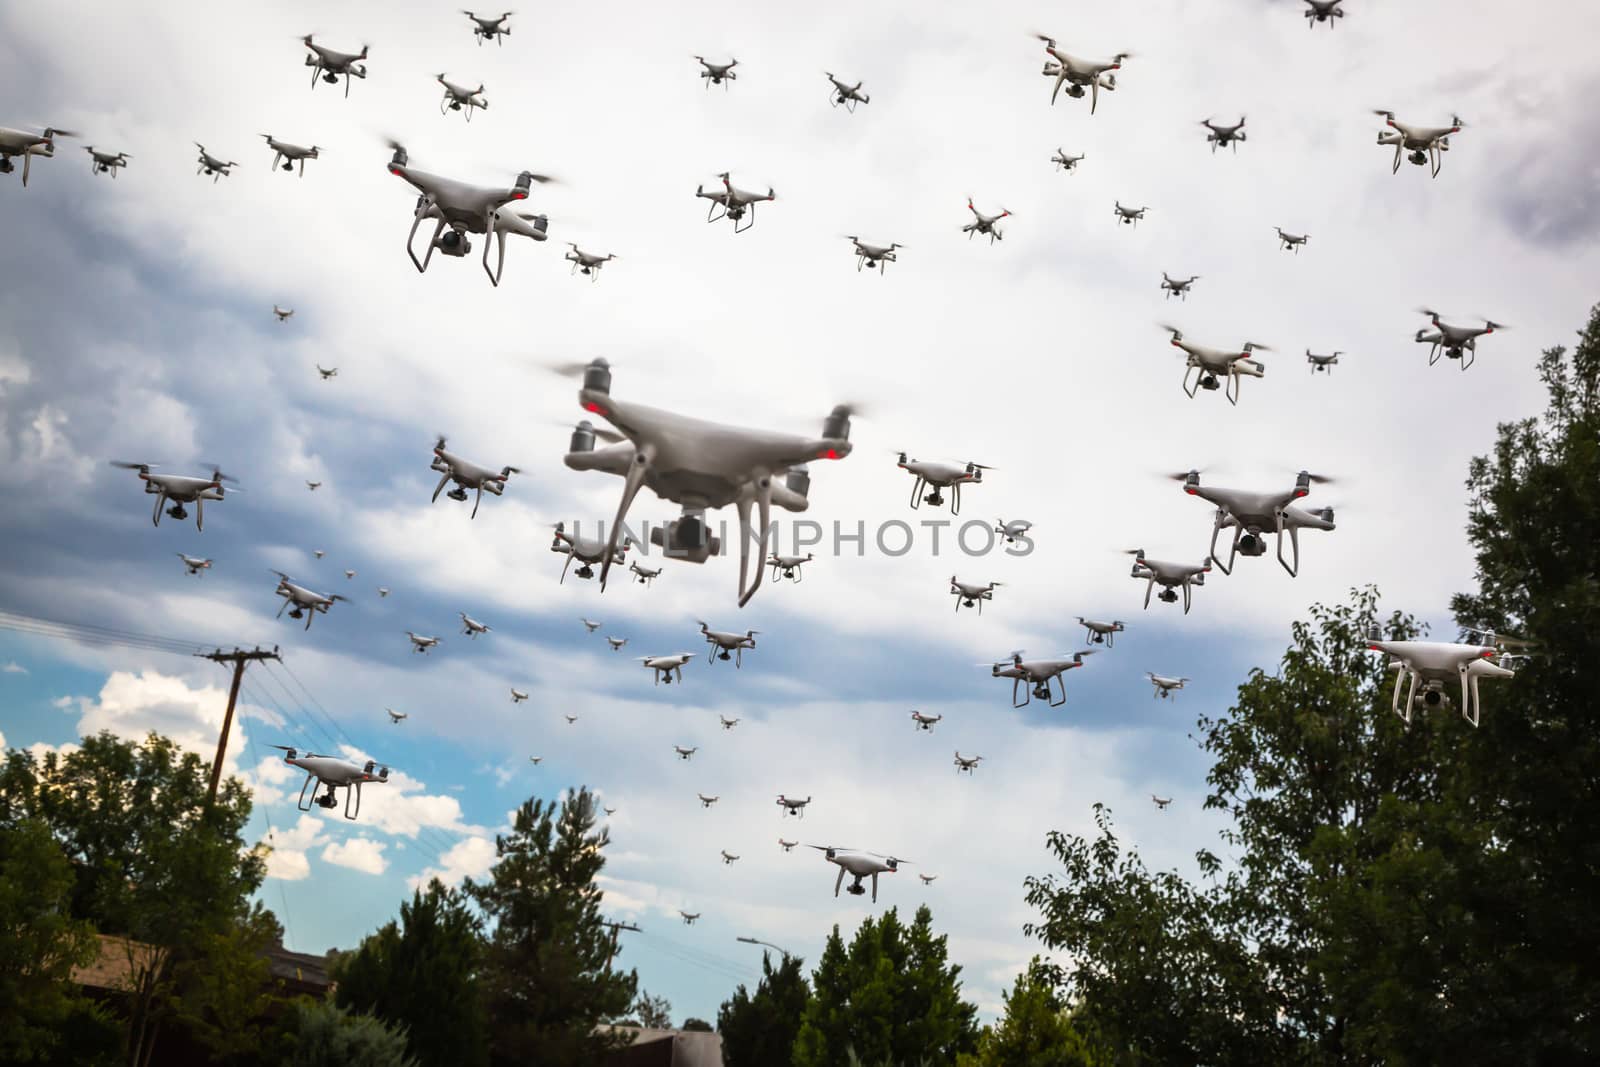 Dozens of Drones Swarm in the Cloudy Sky. by Feverpitched